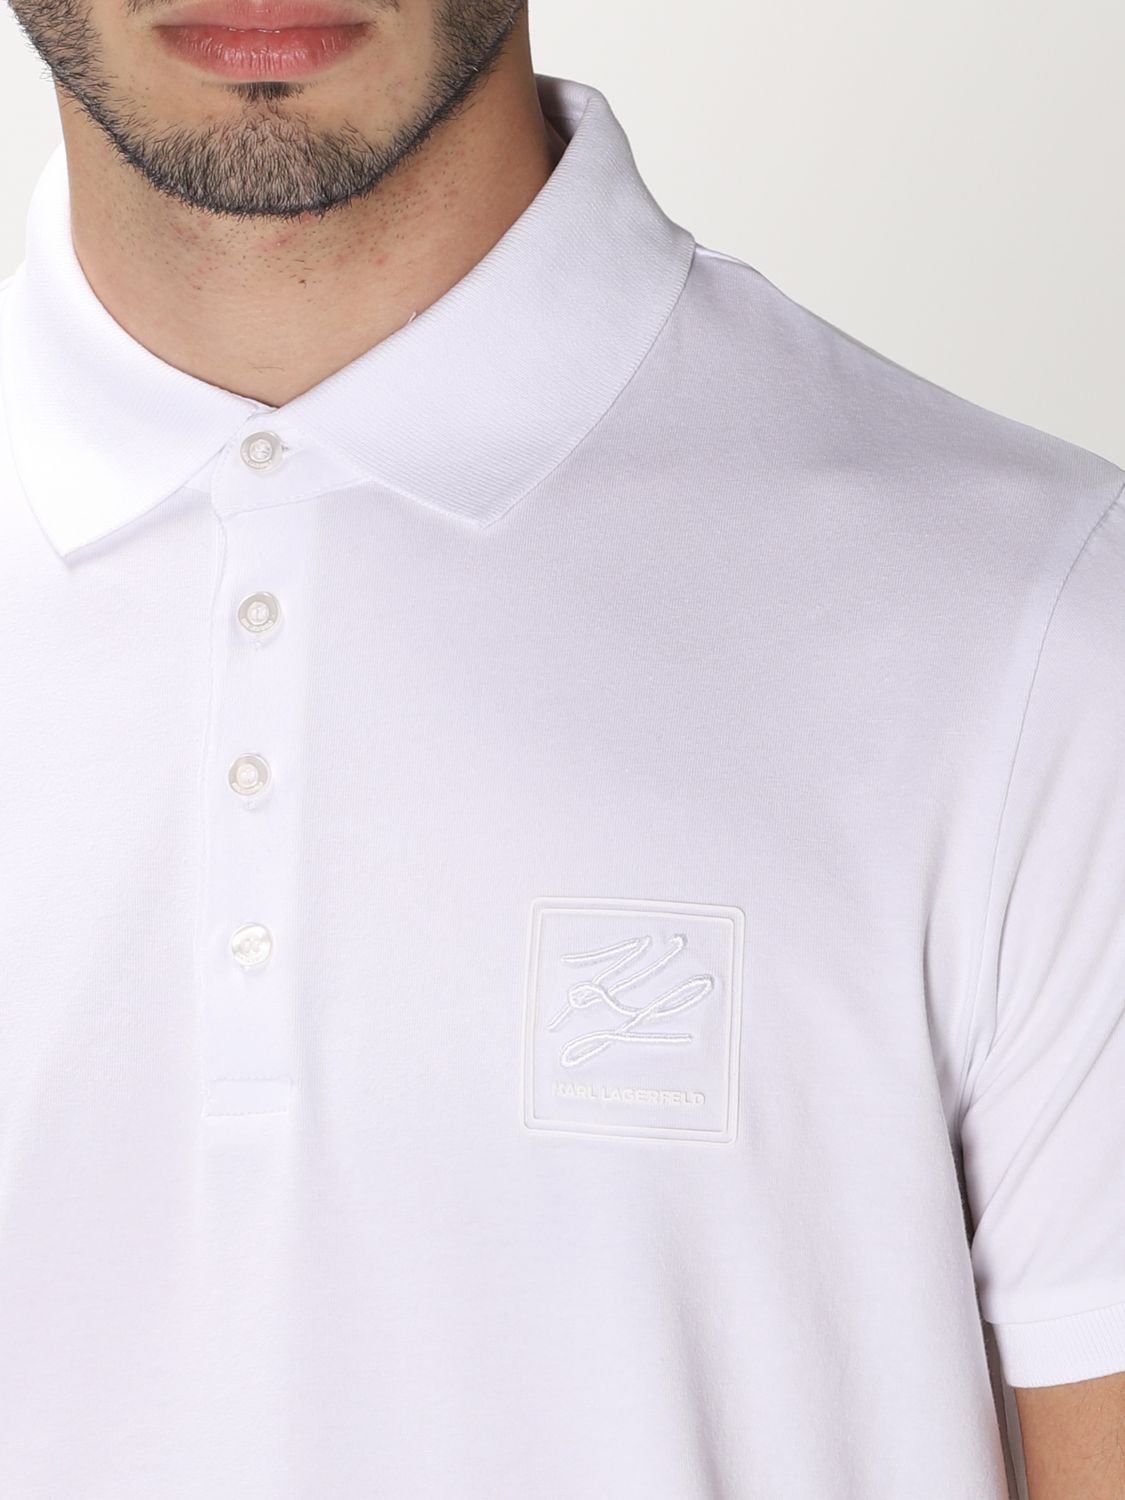 Lagerfeld Outlet: polo shirt man - White | Karl Lagerfeld polo shirt 023511221 online on GIGLIO.COM